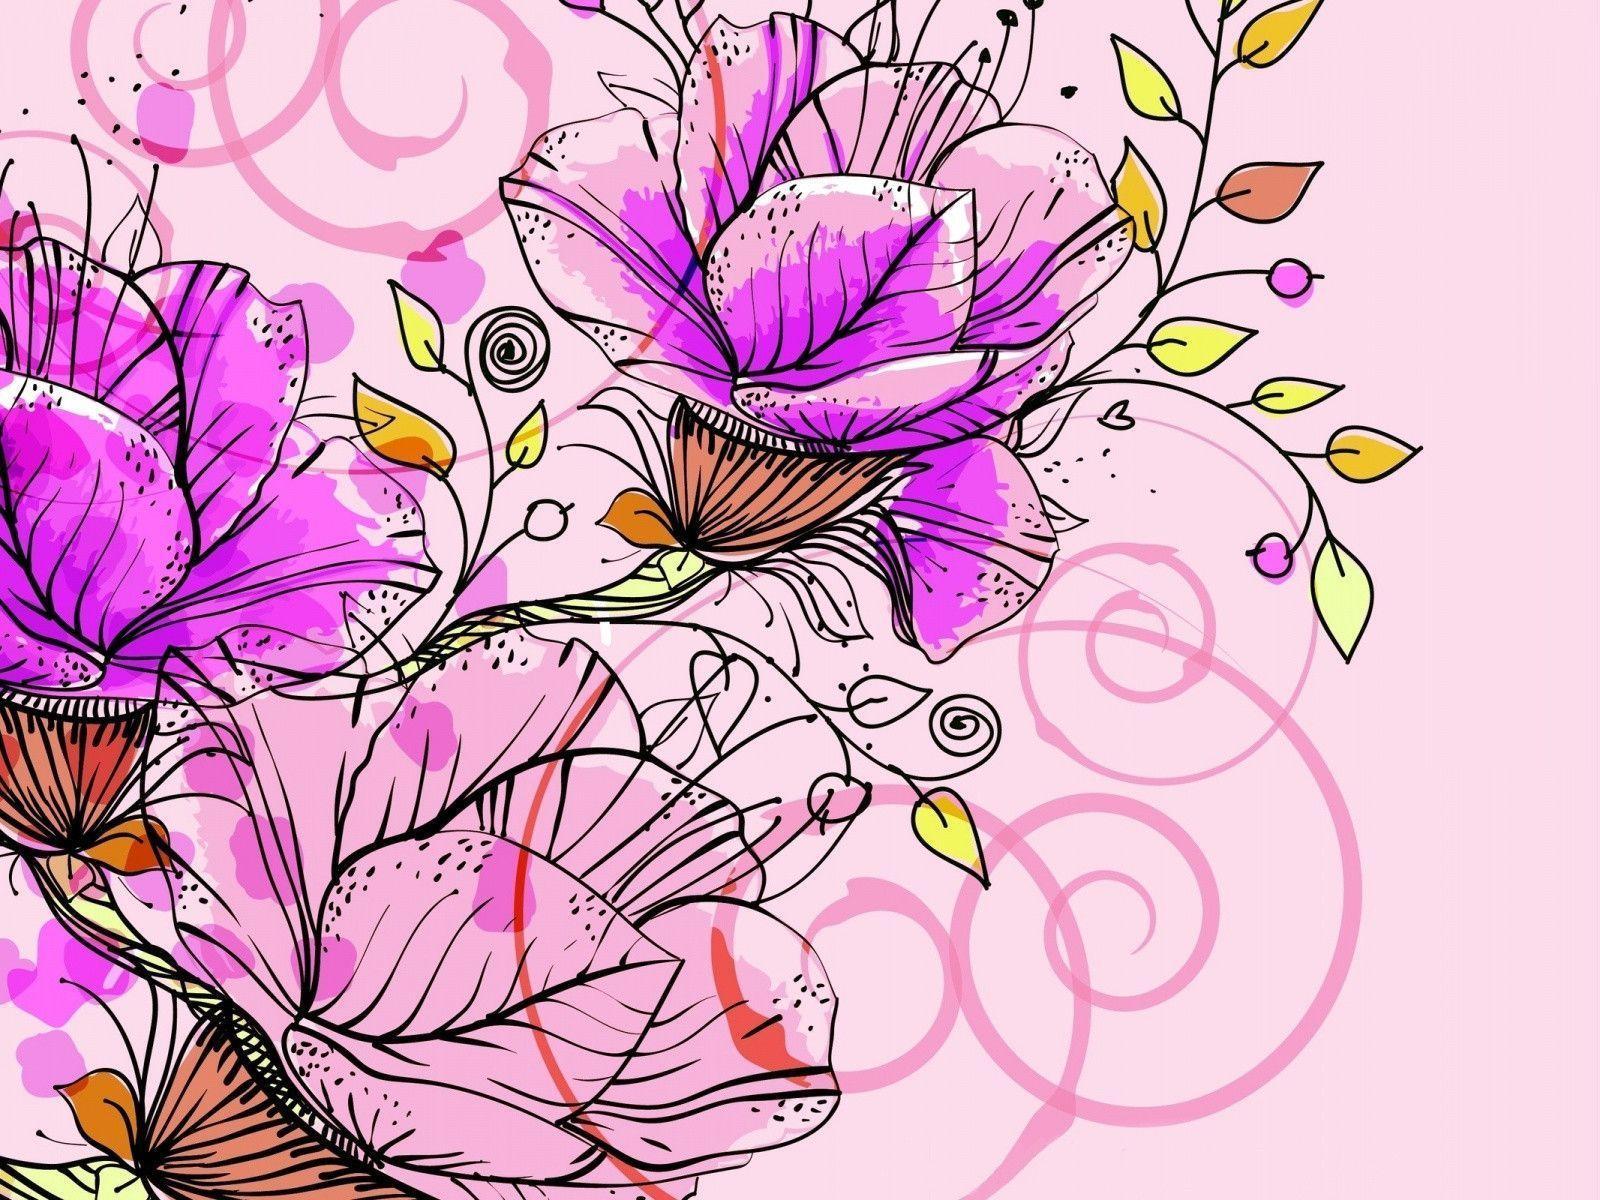 Pink Flowers Background Wallpaper